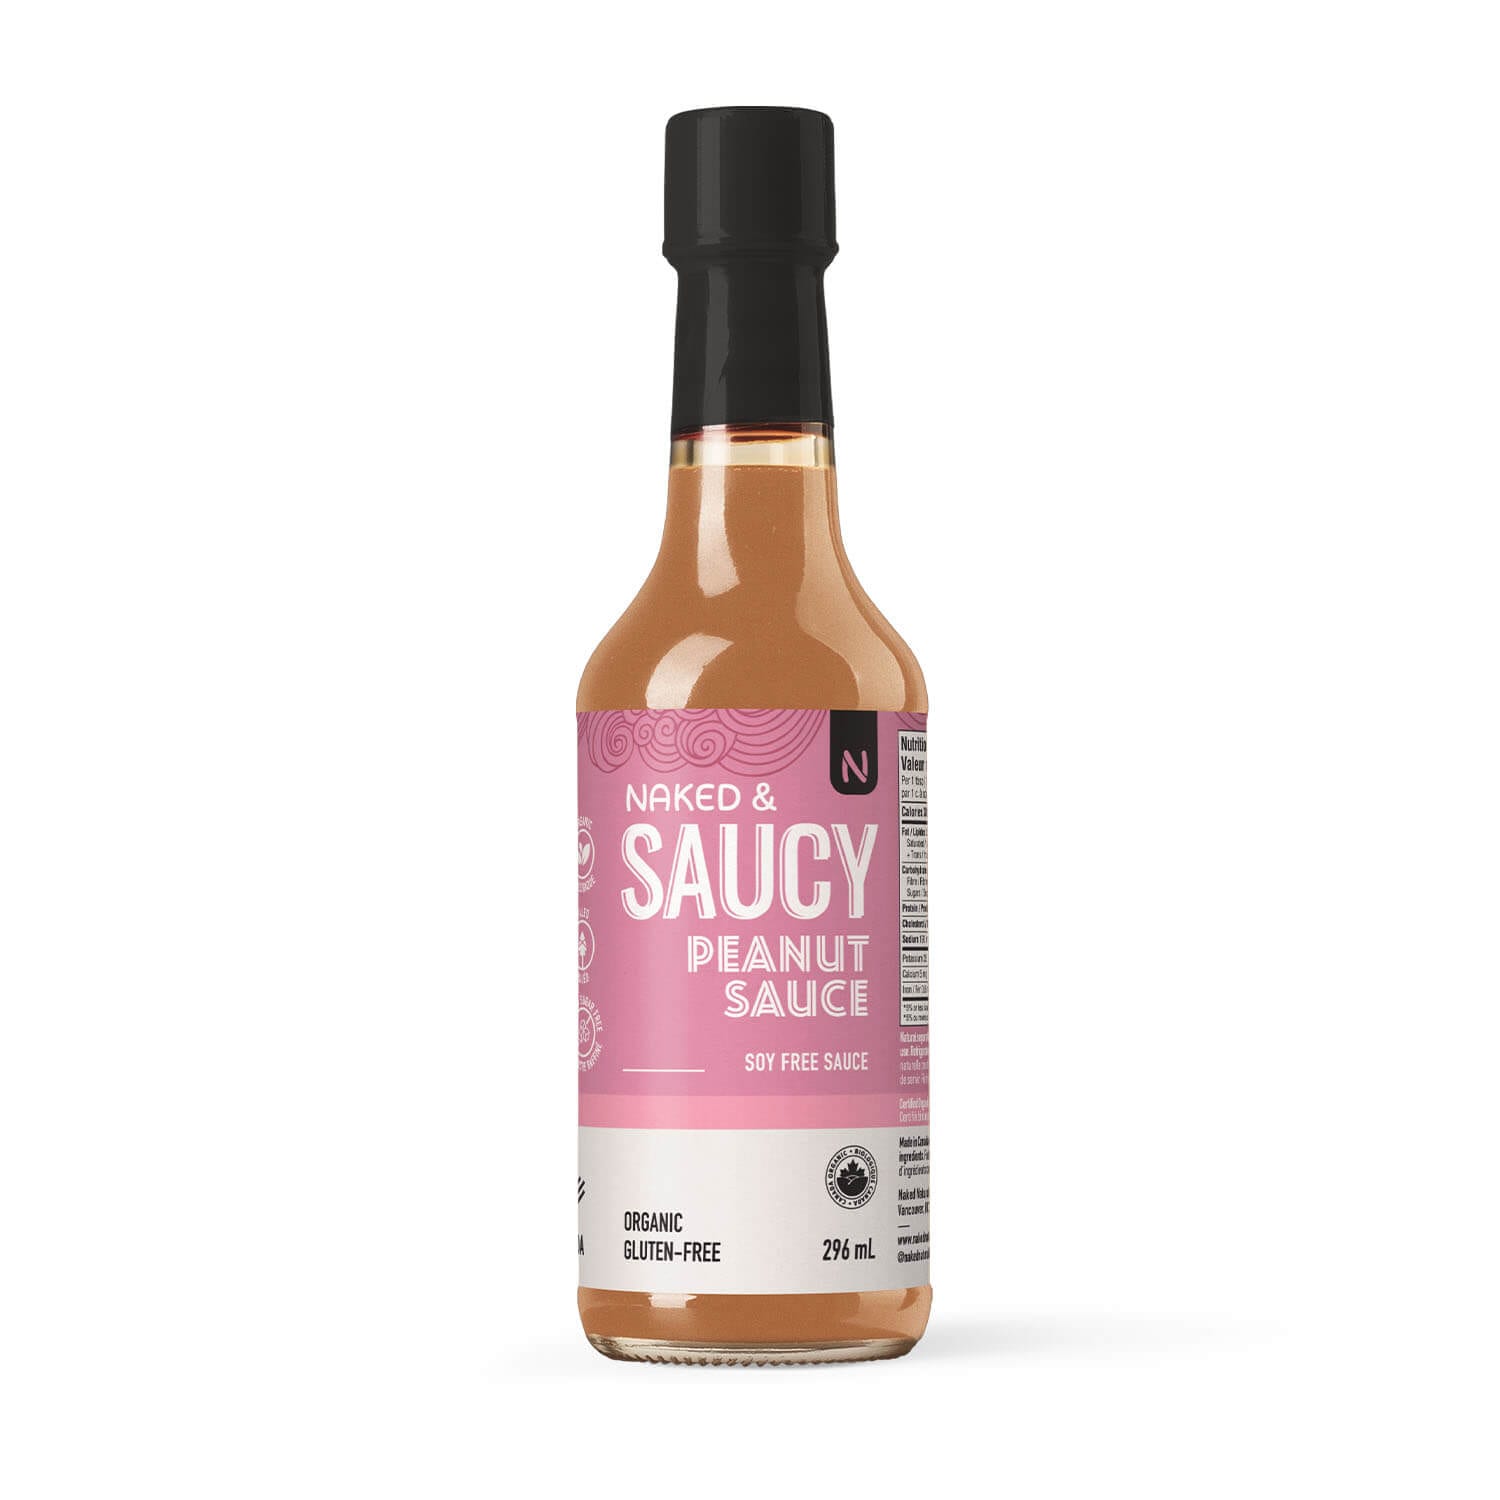 Naked & Saucy Soy-Free Peanut Sauce (296ml) - Lifestyle Markets